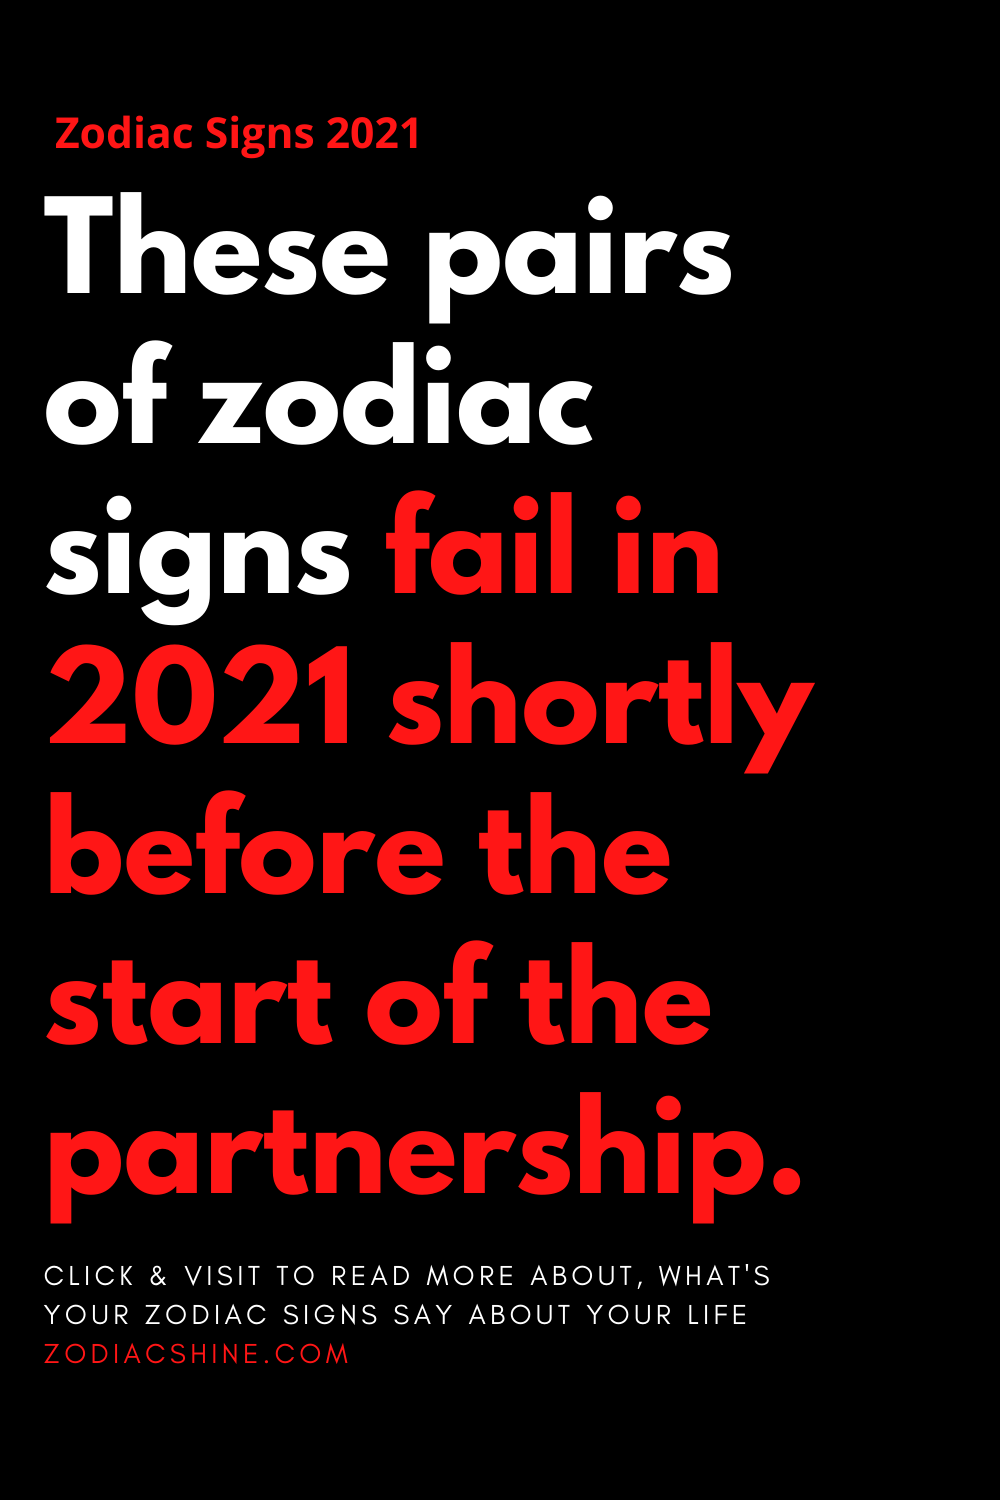 These pairs of zodiac signs fail in 2021 shortly before the start of the partnership.